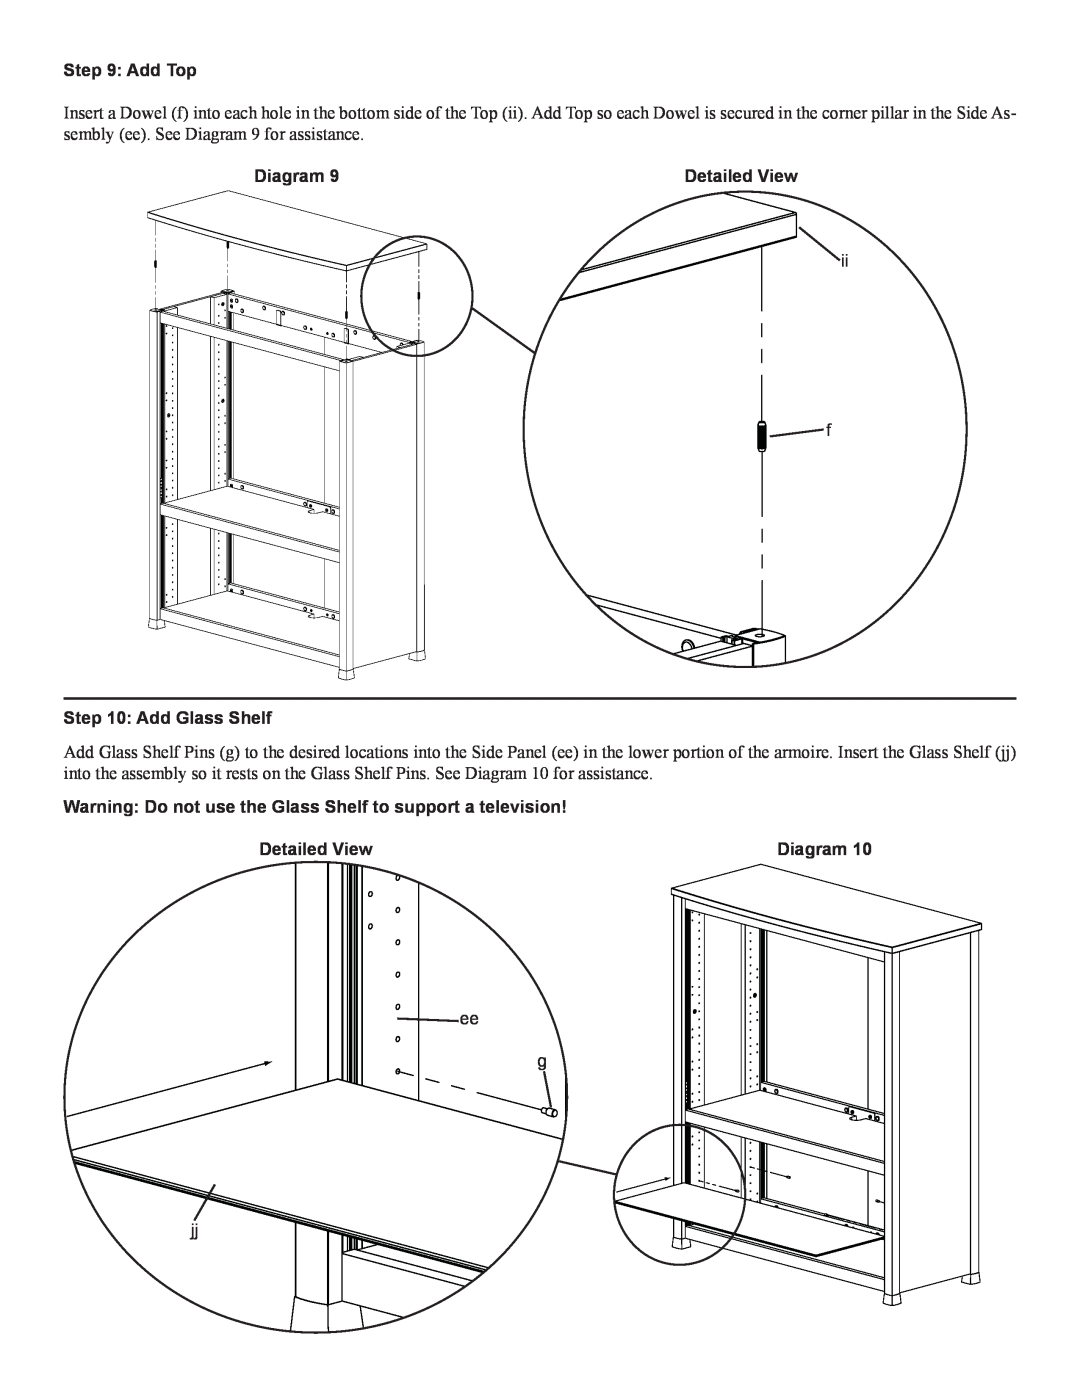 Sanus Systems CFAR47 manual Add Top, Add Glass Shelf, Warning Do not use the Glass Shelf to support a television, Diagram 